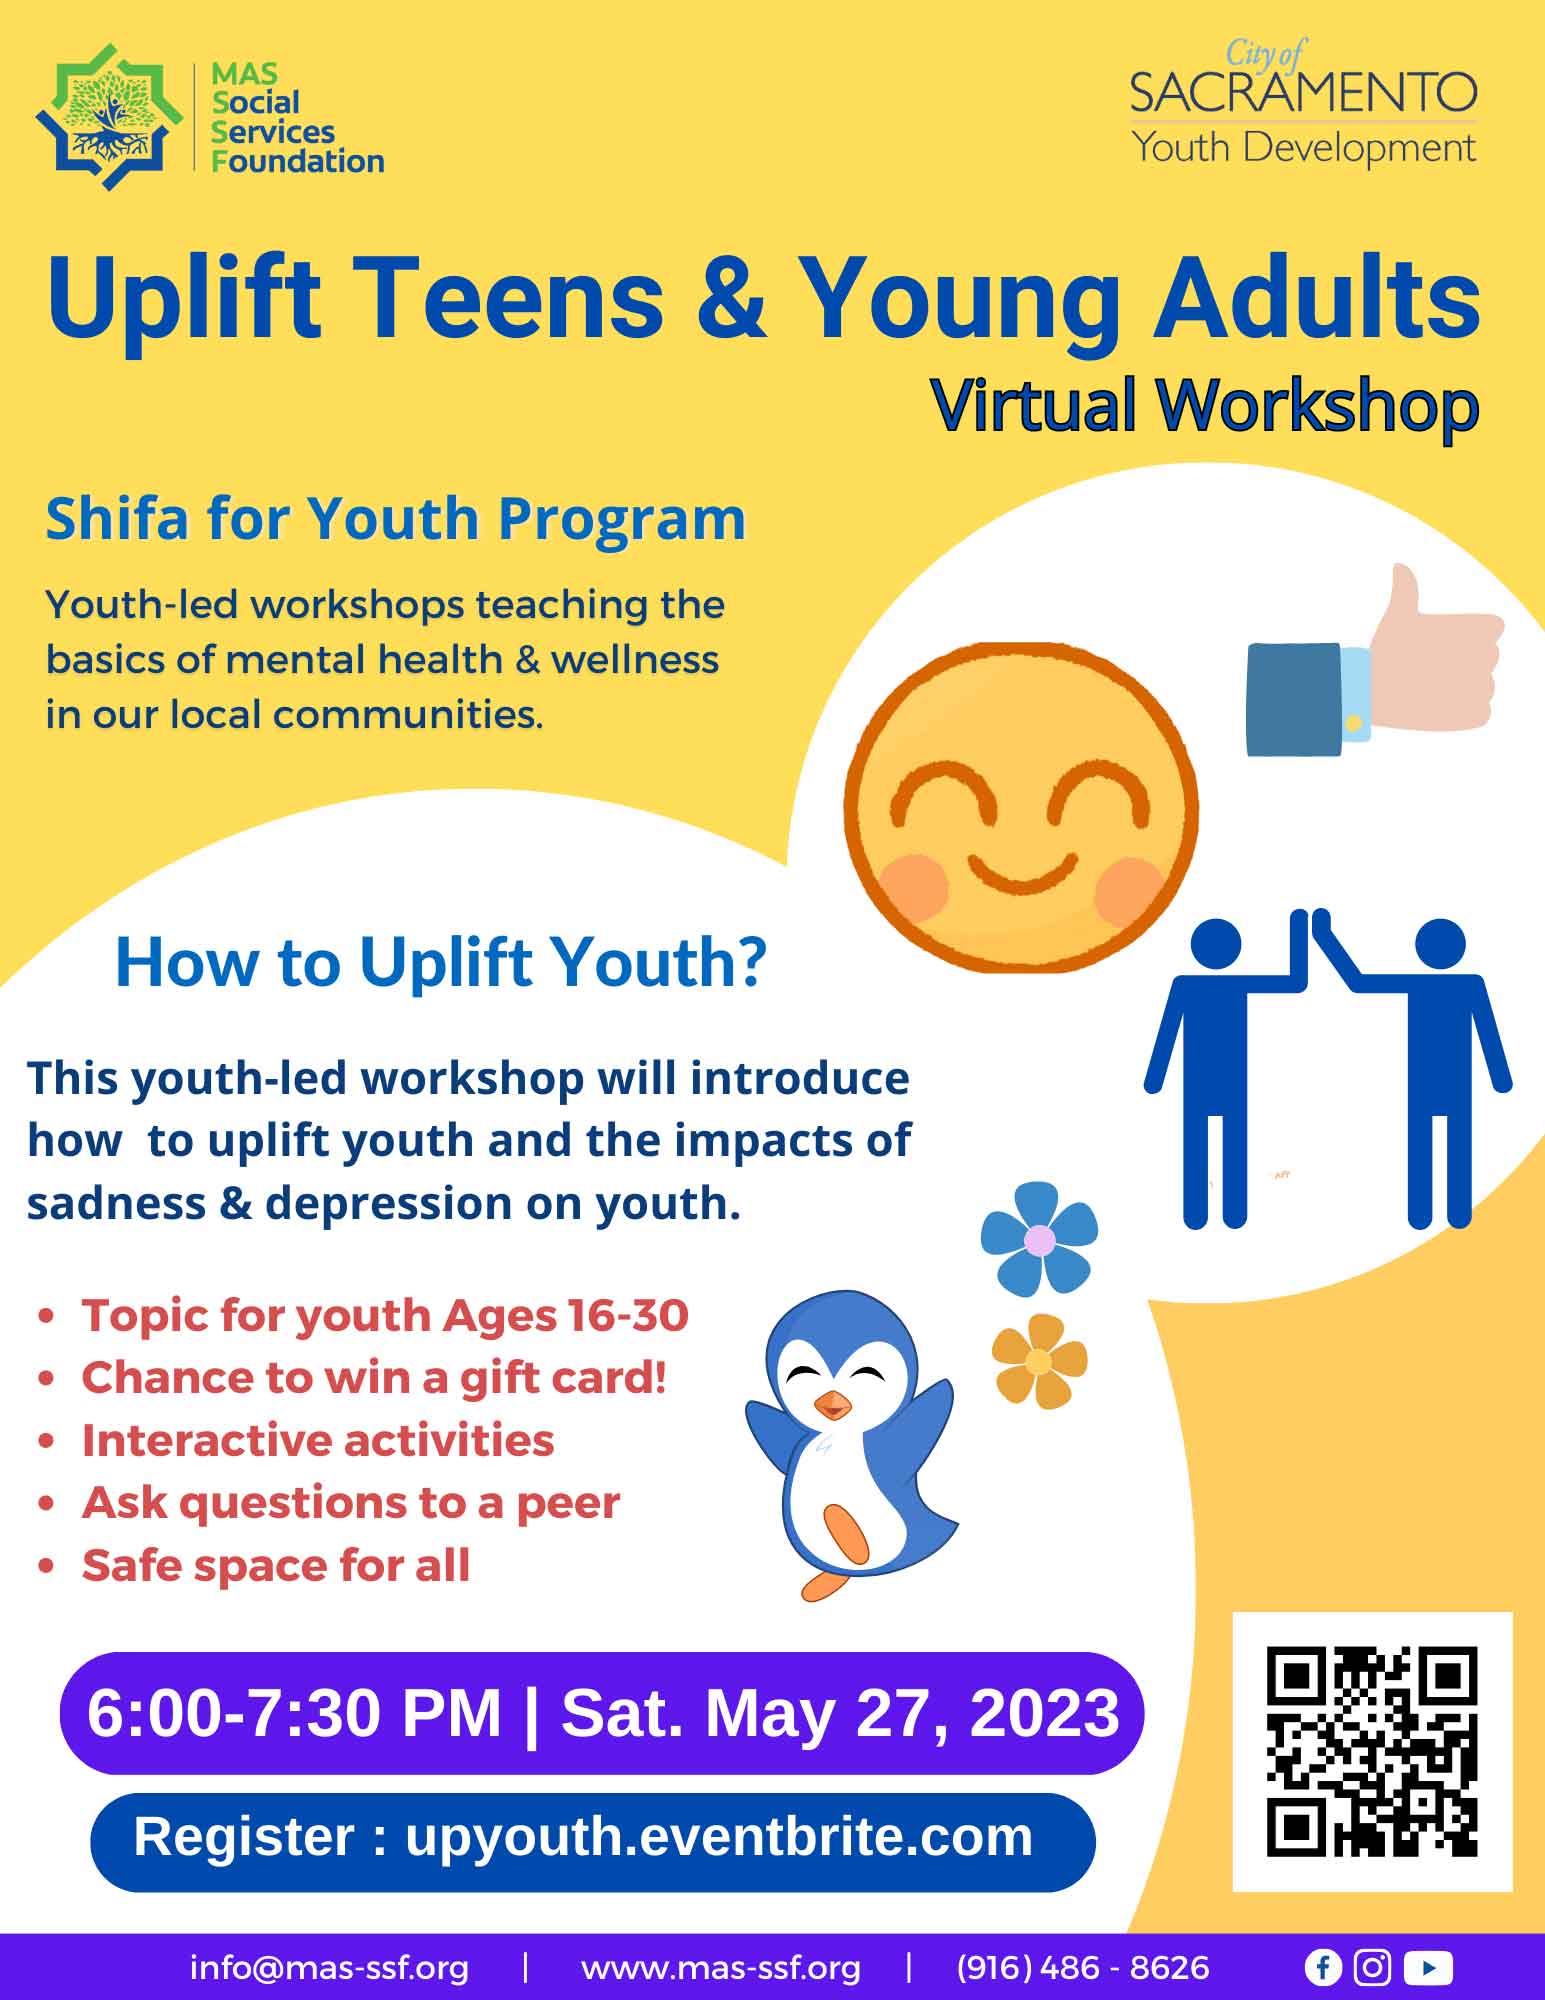 Uplifting Teens & Young Adults